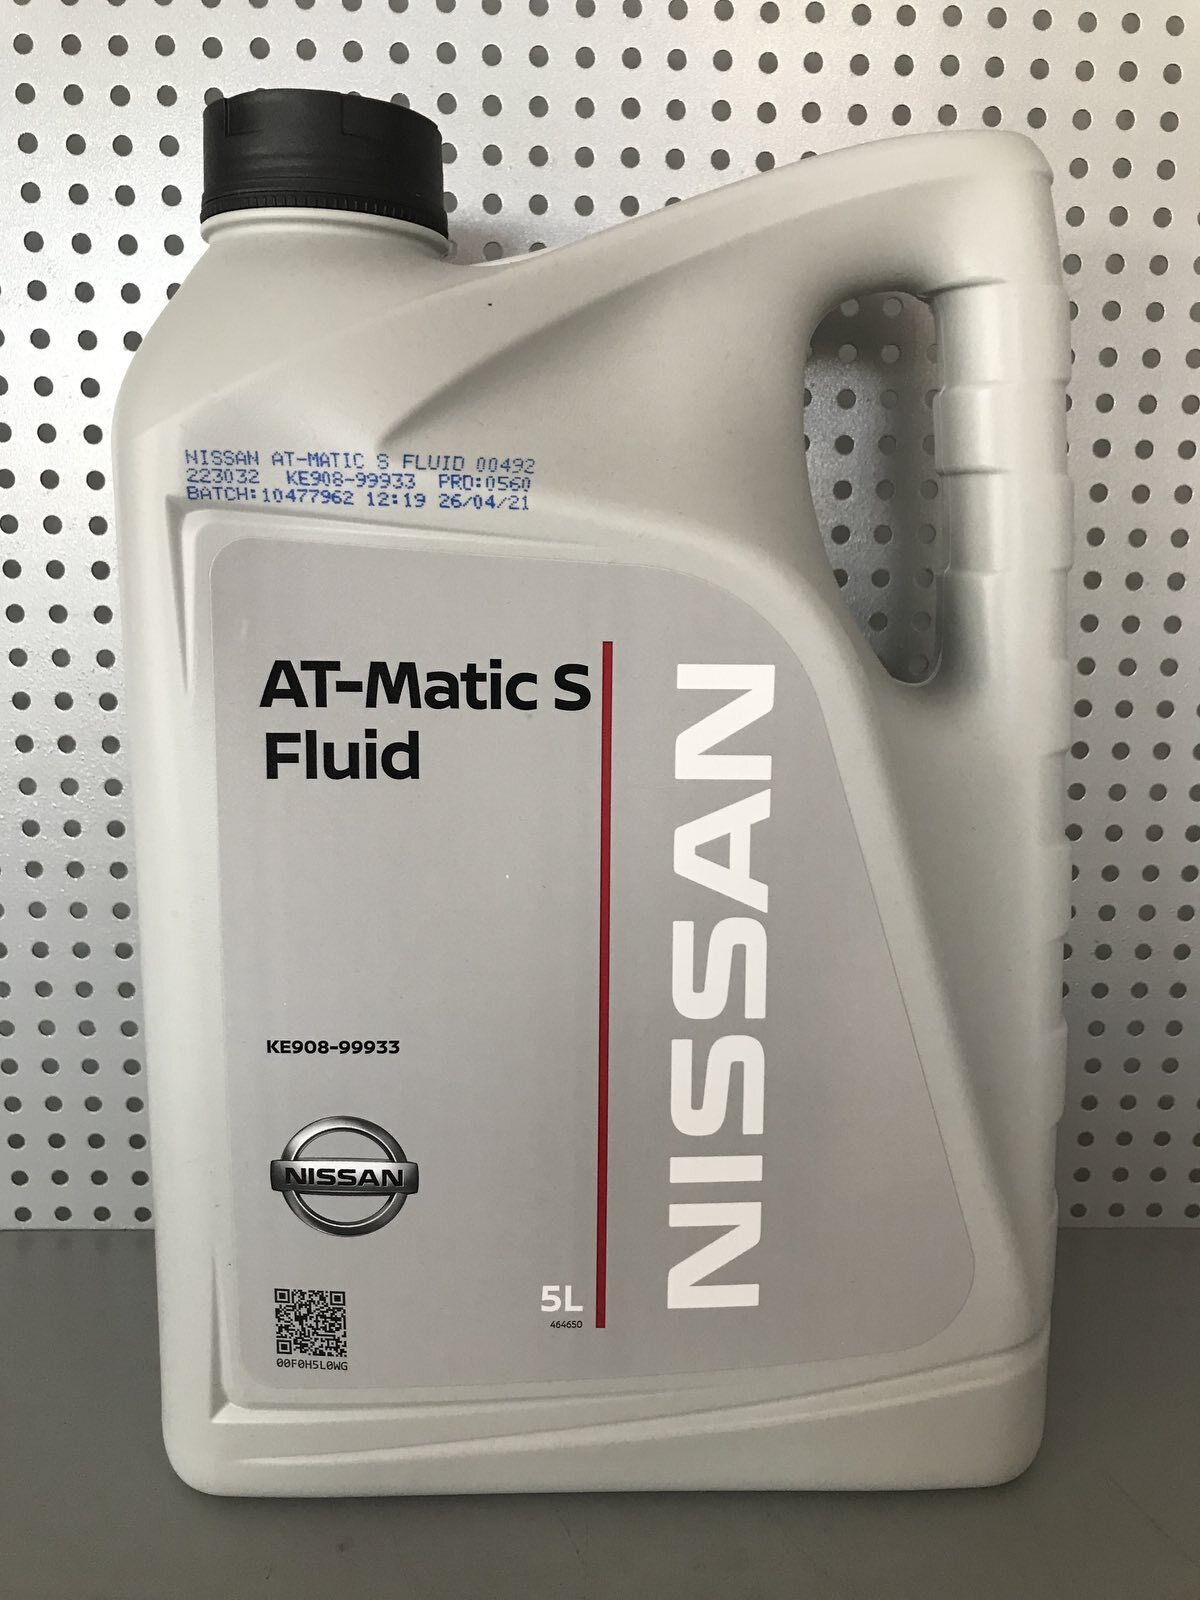 Масло nissan atf matic. Nissan ATF matic-s. Масло Nissan matic s 5л. Nissan ATF matic s Fluid. Nissan ATF matic s Fluid артикул.